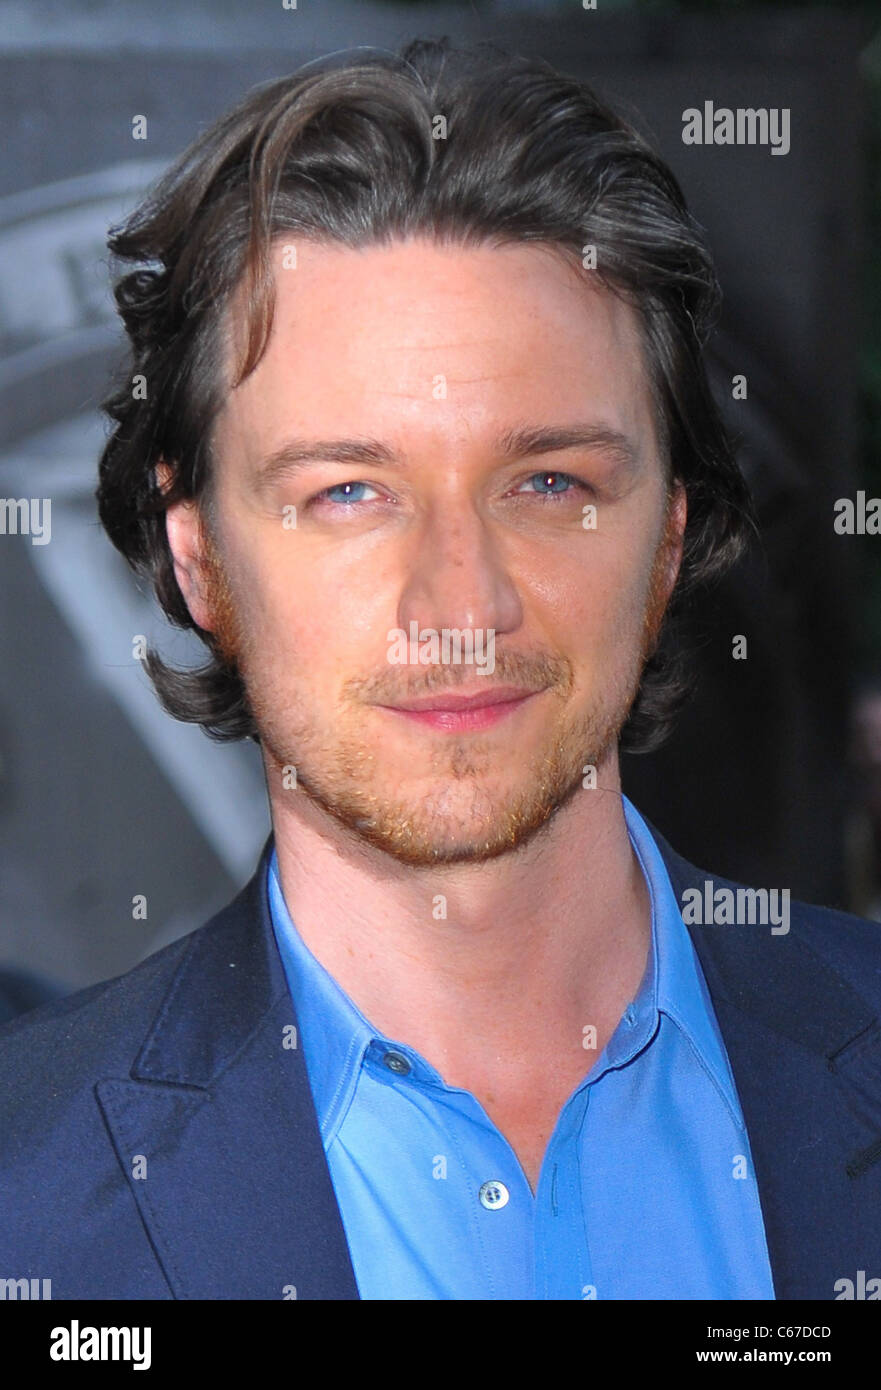 James McAvoy at arrivals for X-MEN: FIRST CLASS Premiere, The Ziegfeld Theatre, New York, NY May 25, 2011. Photo By: Gregorio T. Binuya/Everett Collection Stock Photo